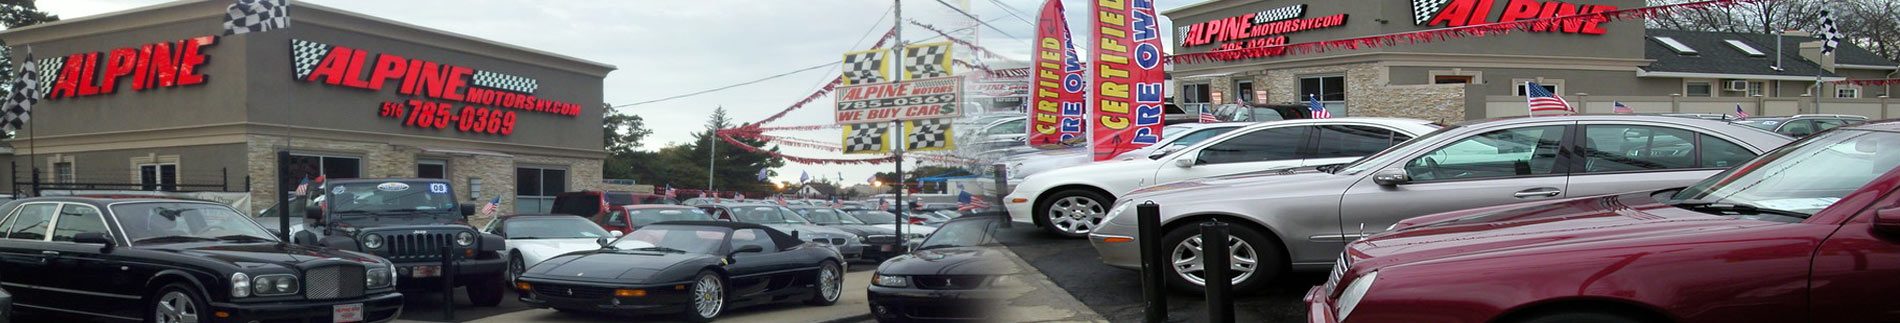 Used cars for sale in Wantagh | Alpine Motors Inc. Wantagh New York